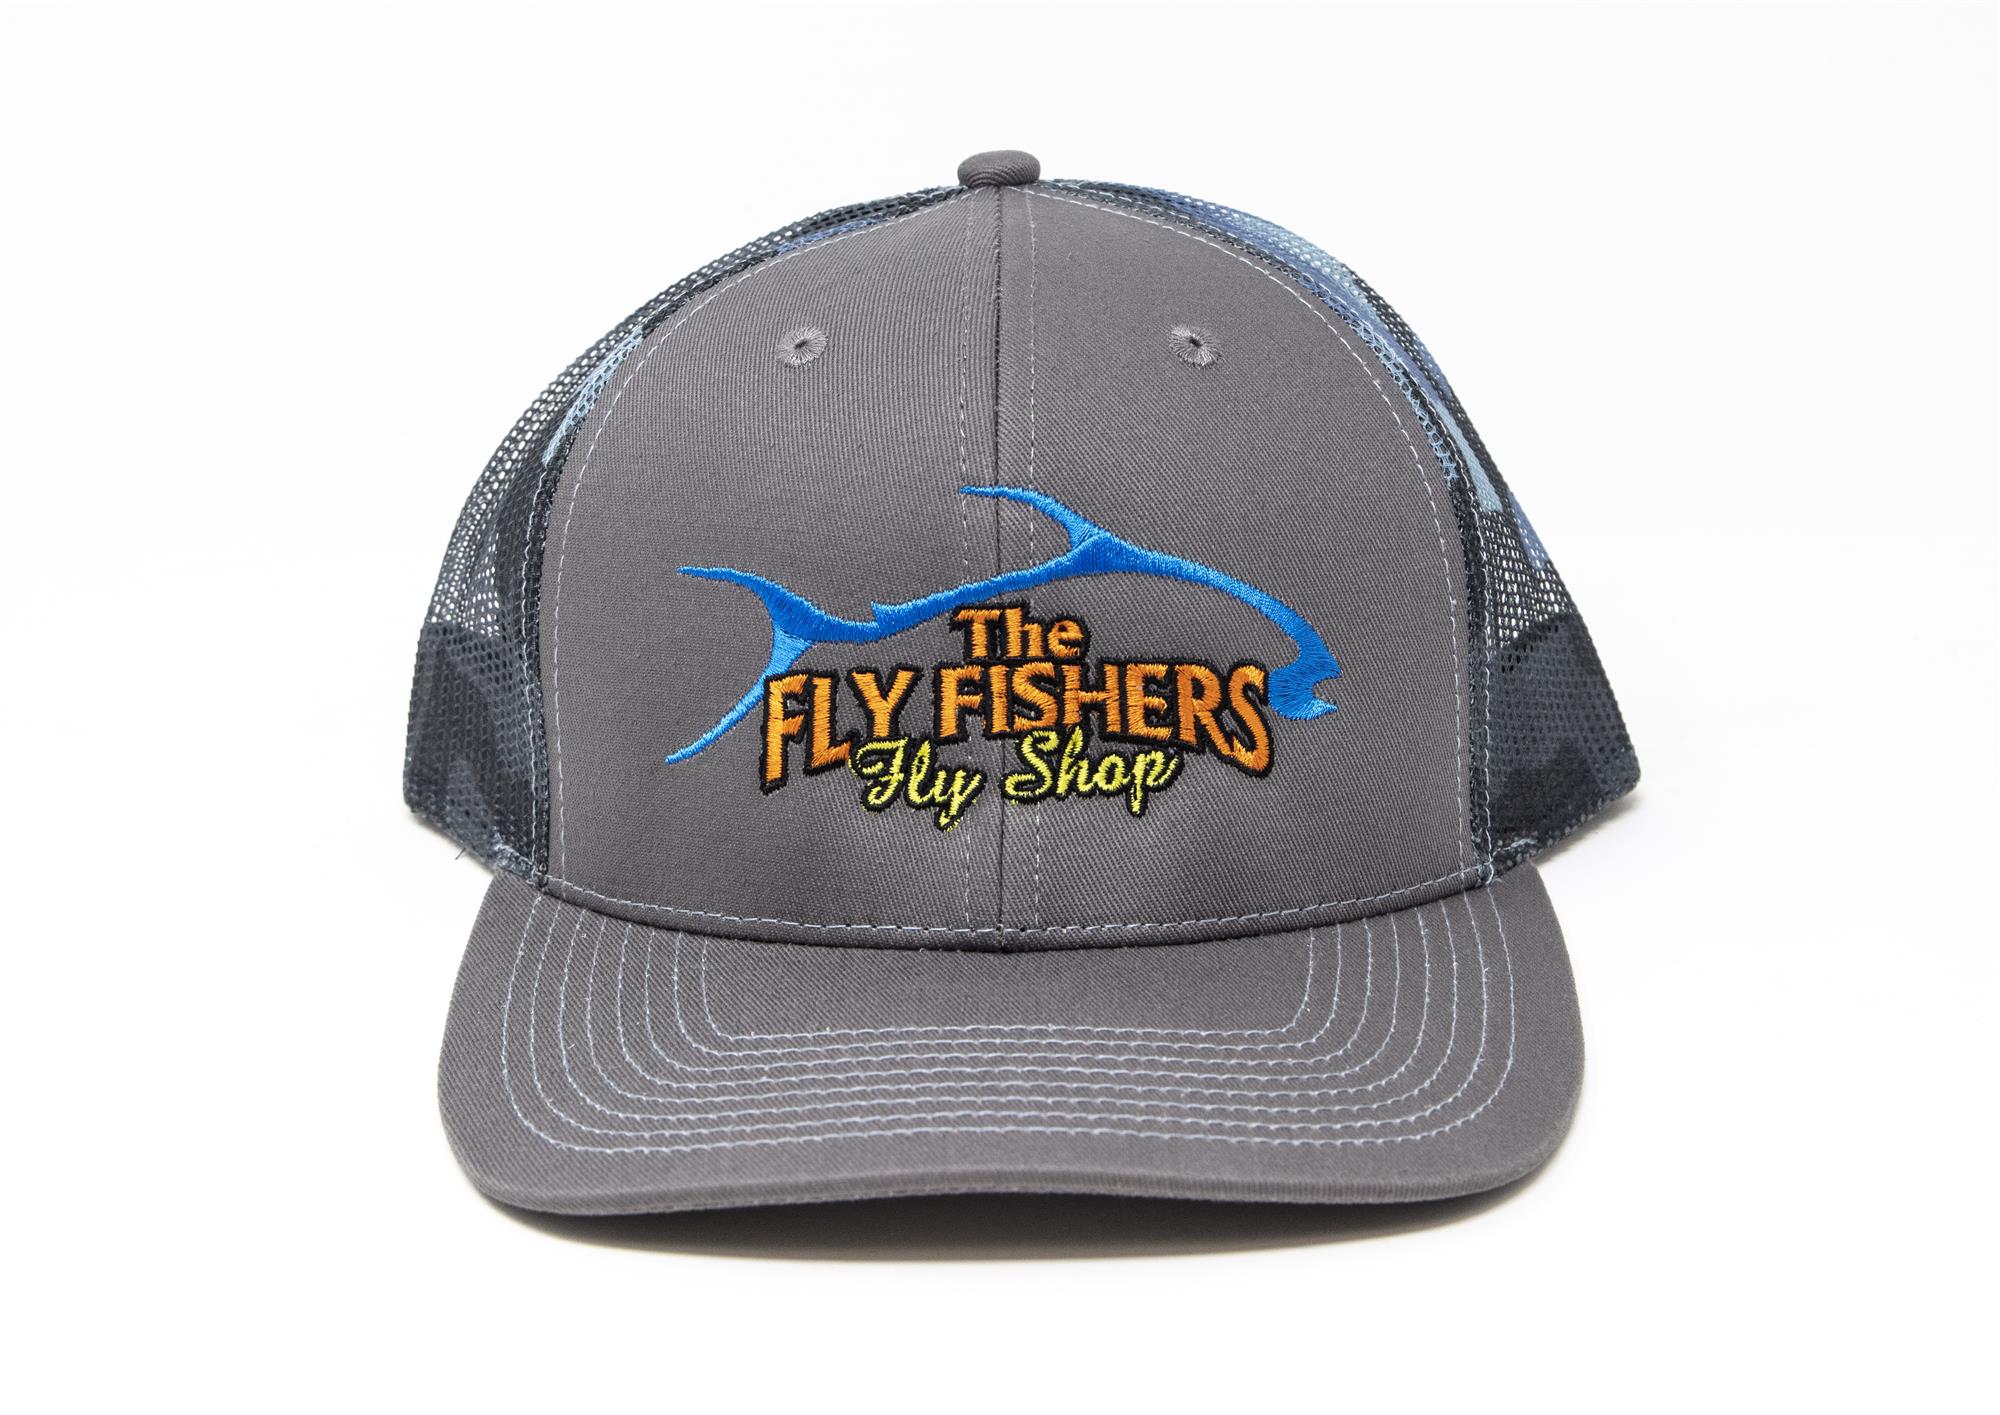 The Fly Fishers Permit Logo Trucker Hats are perfect for fly fishing on the flats or at the bar.